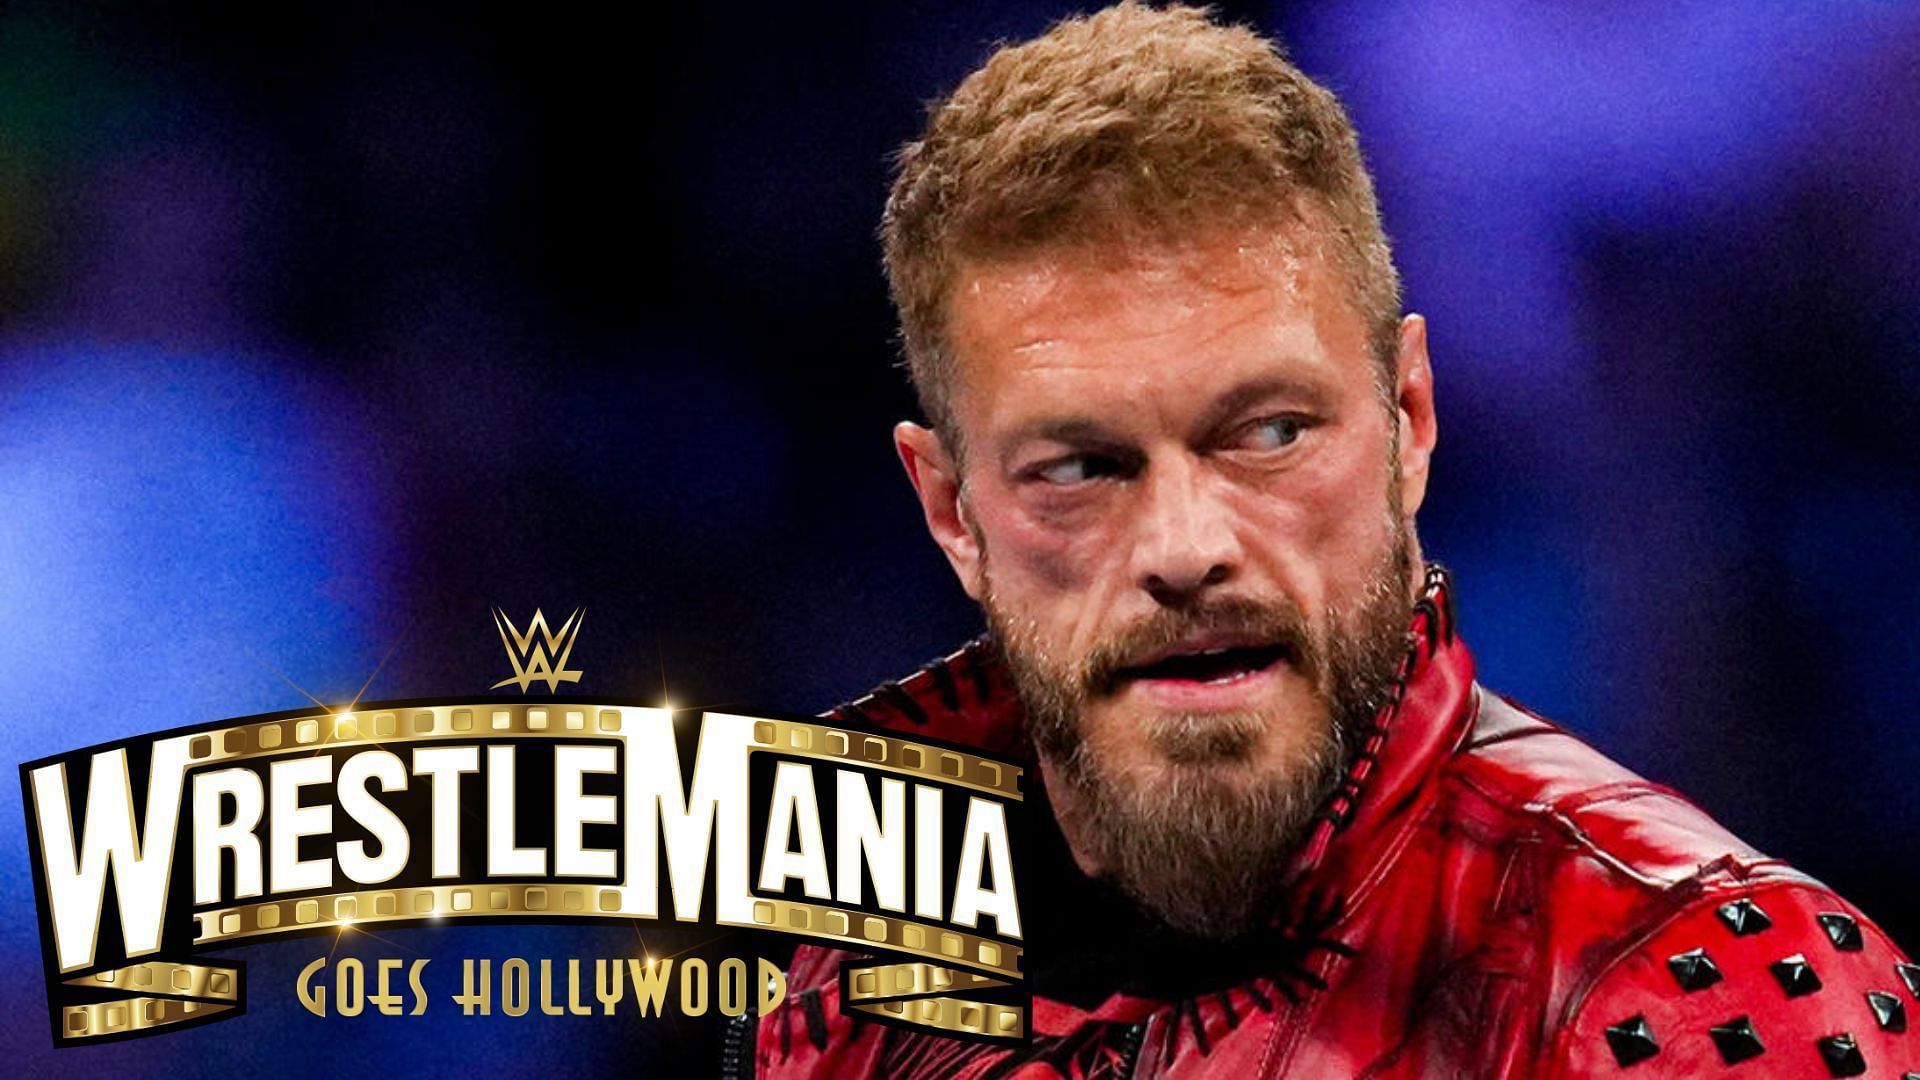 Edge may be wrestling in his last WrestleMania match this year